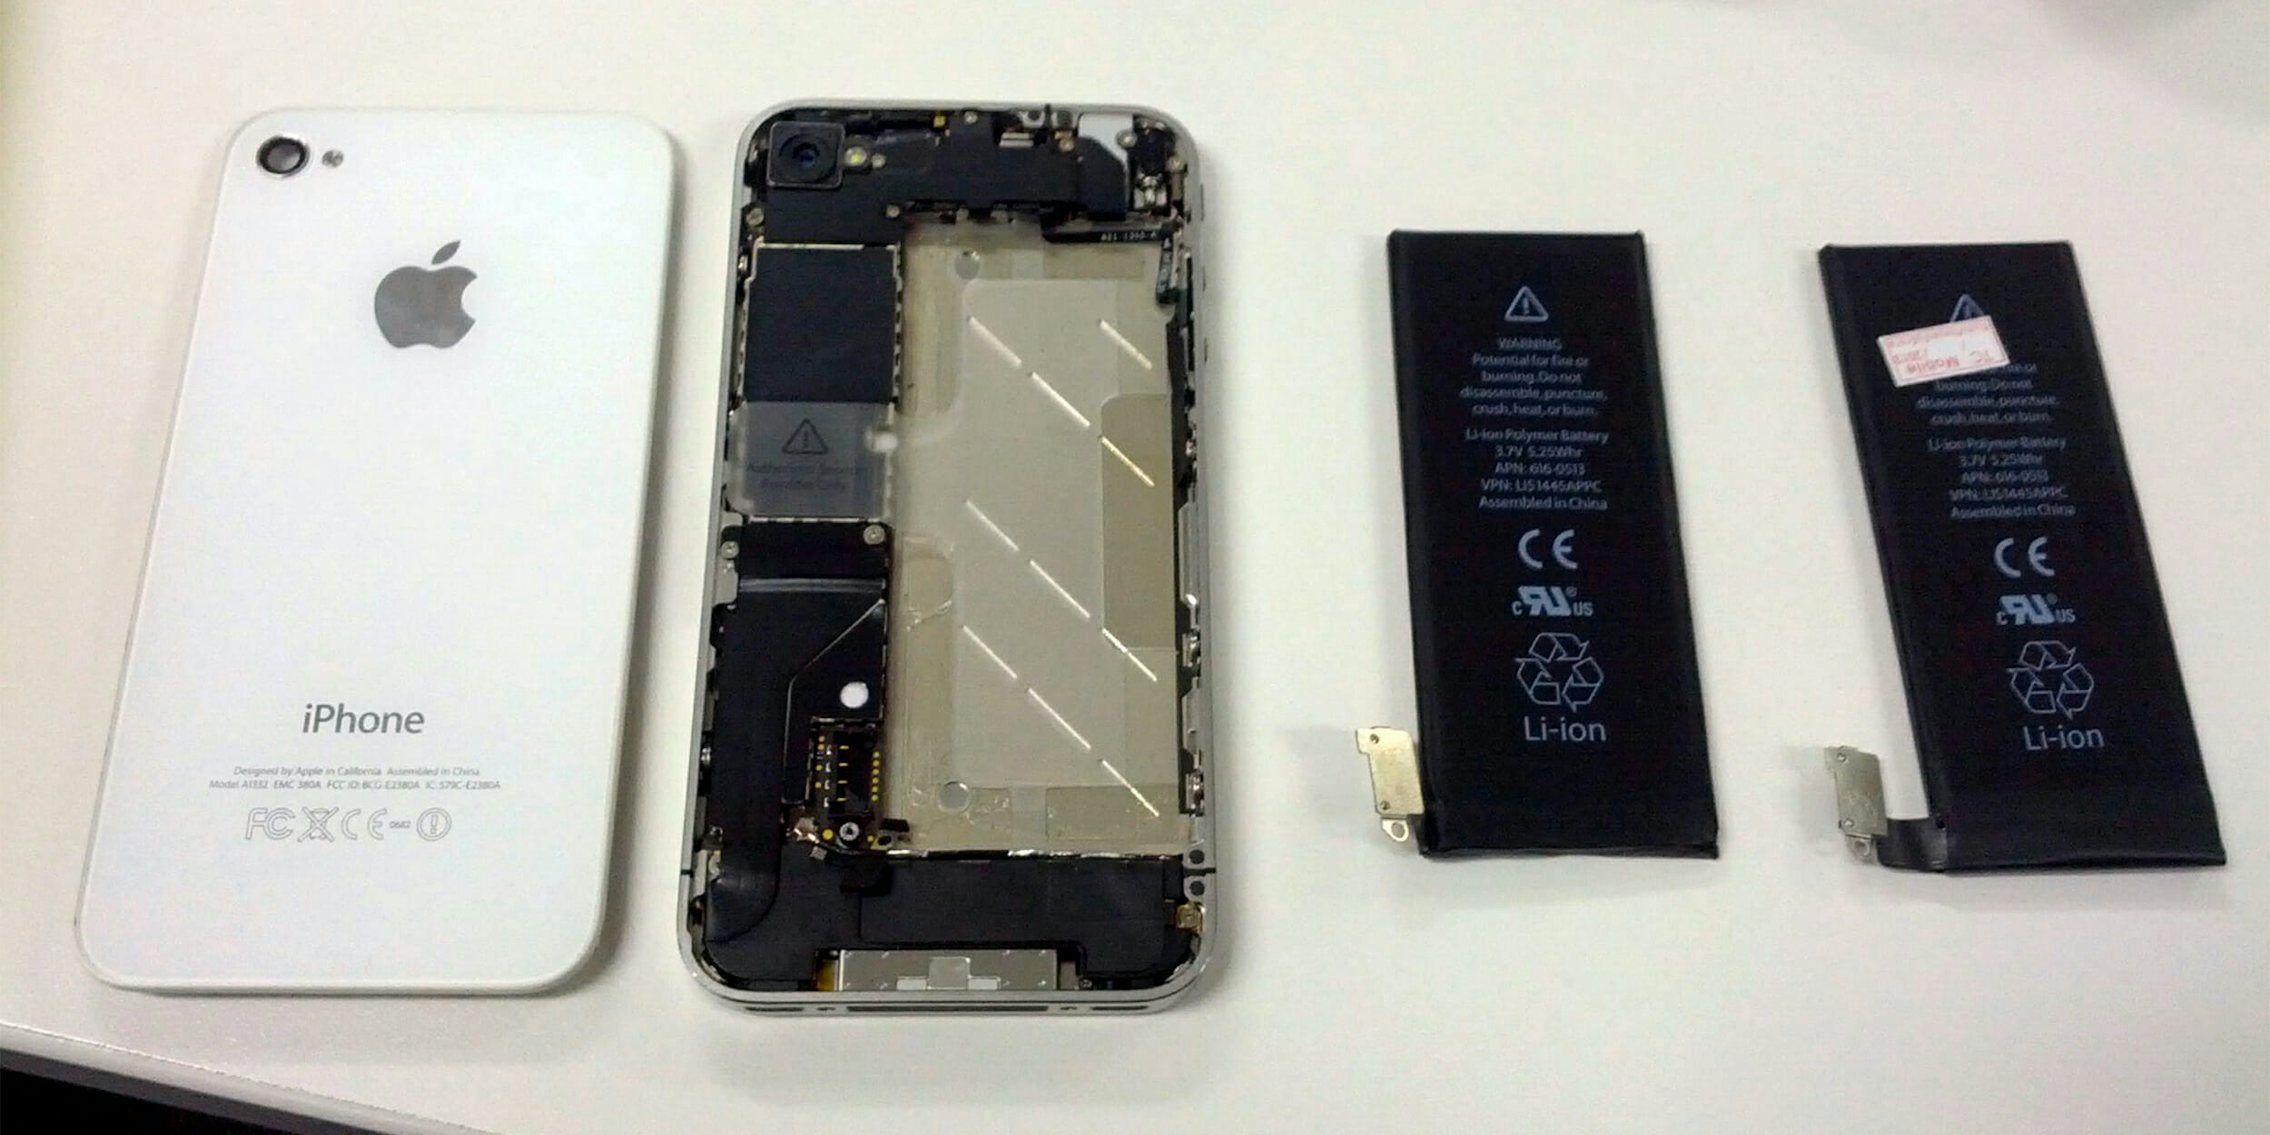 iphone battery replacement - how to change your iphone battery